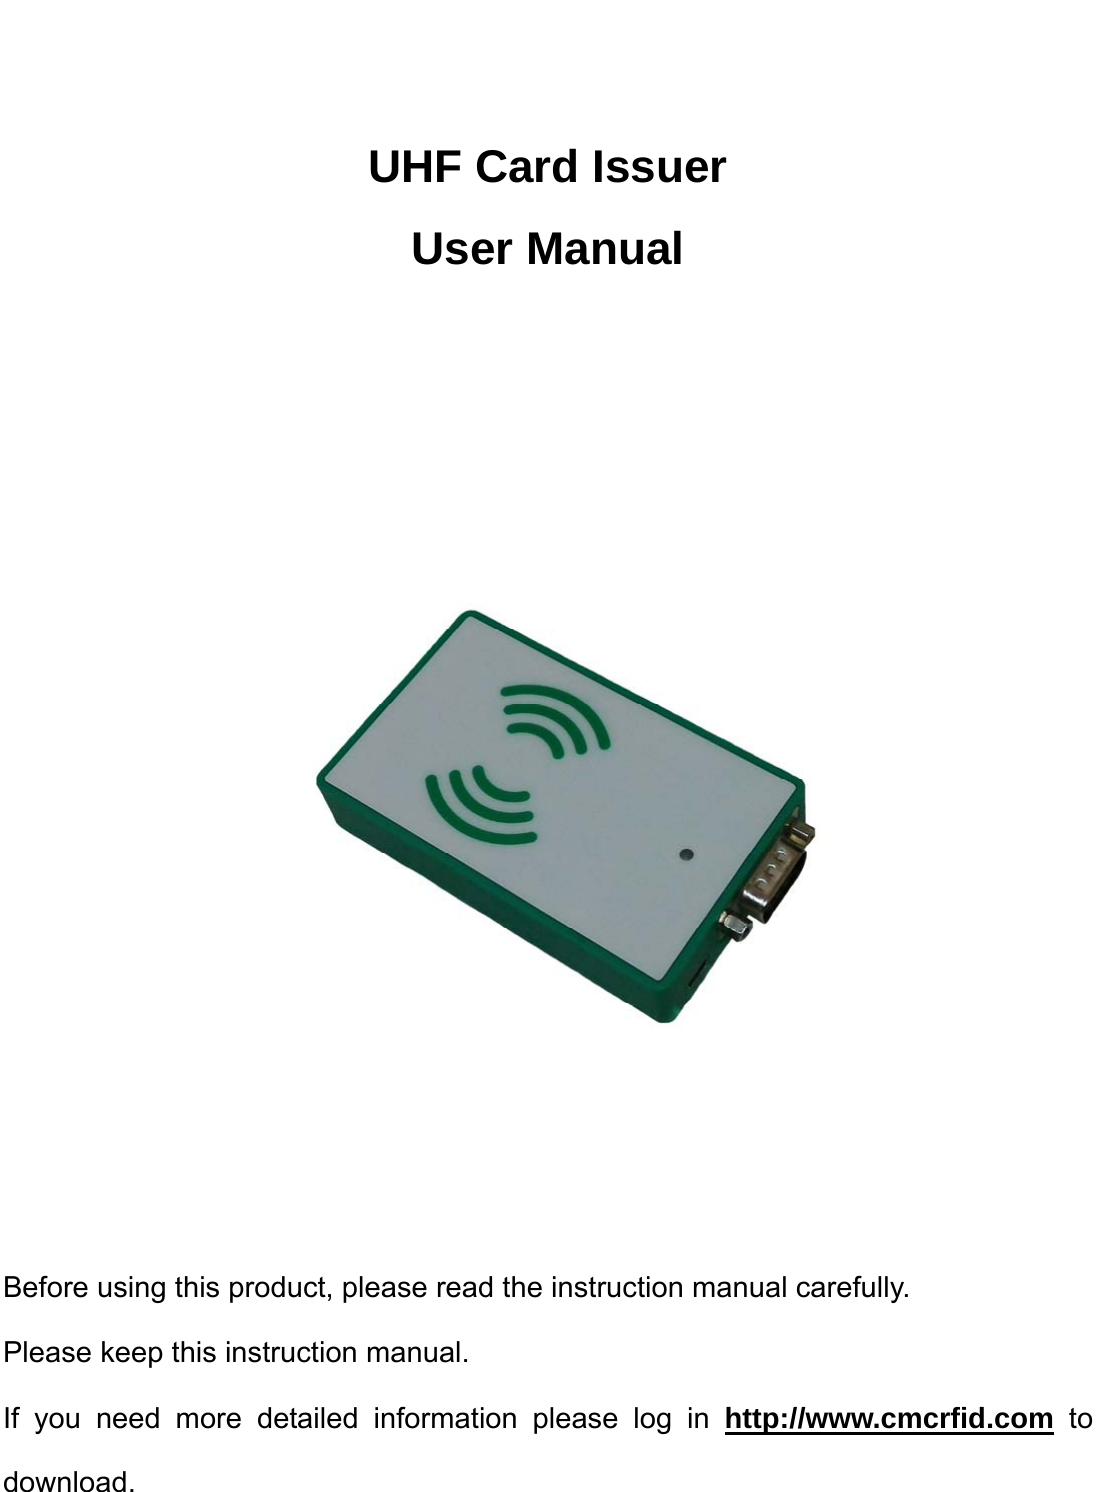    UHF Card Issuer User Manual        Before using this product, please read the instruction manual carefully. Please keep this instruction manual. If you need more detailed information please log in http://www.cmcrfid.com to download.  